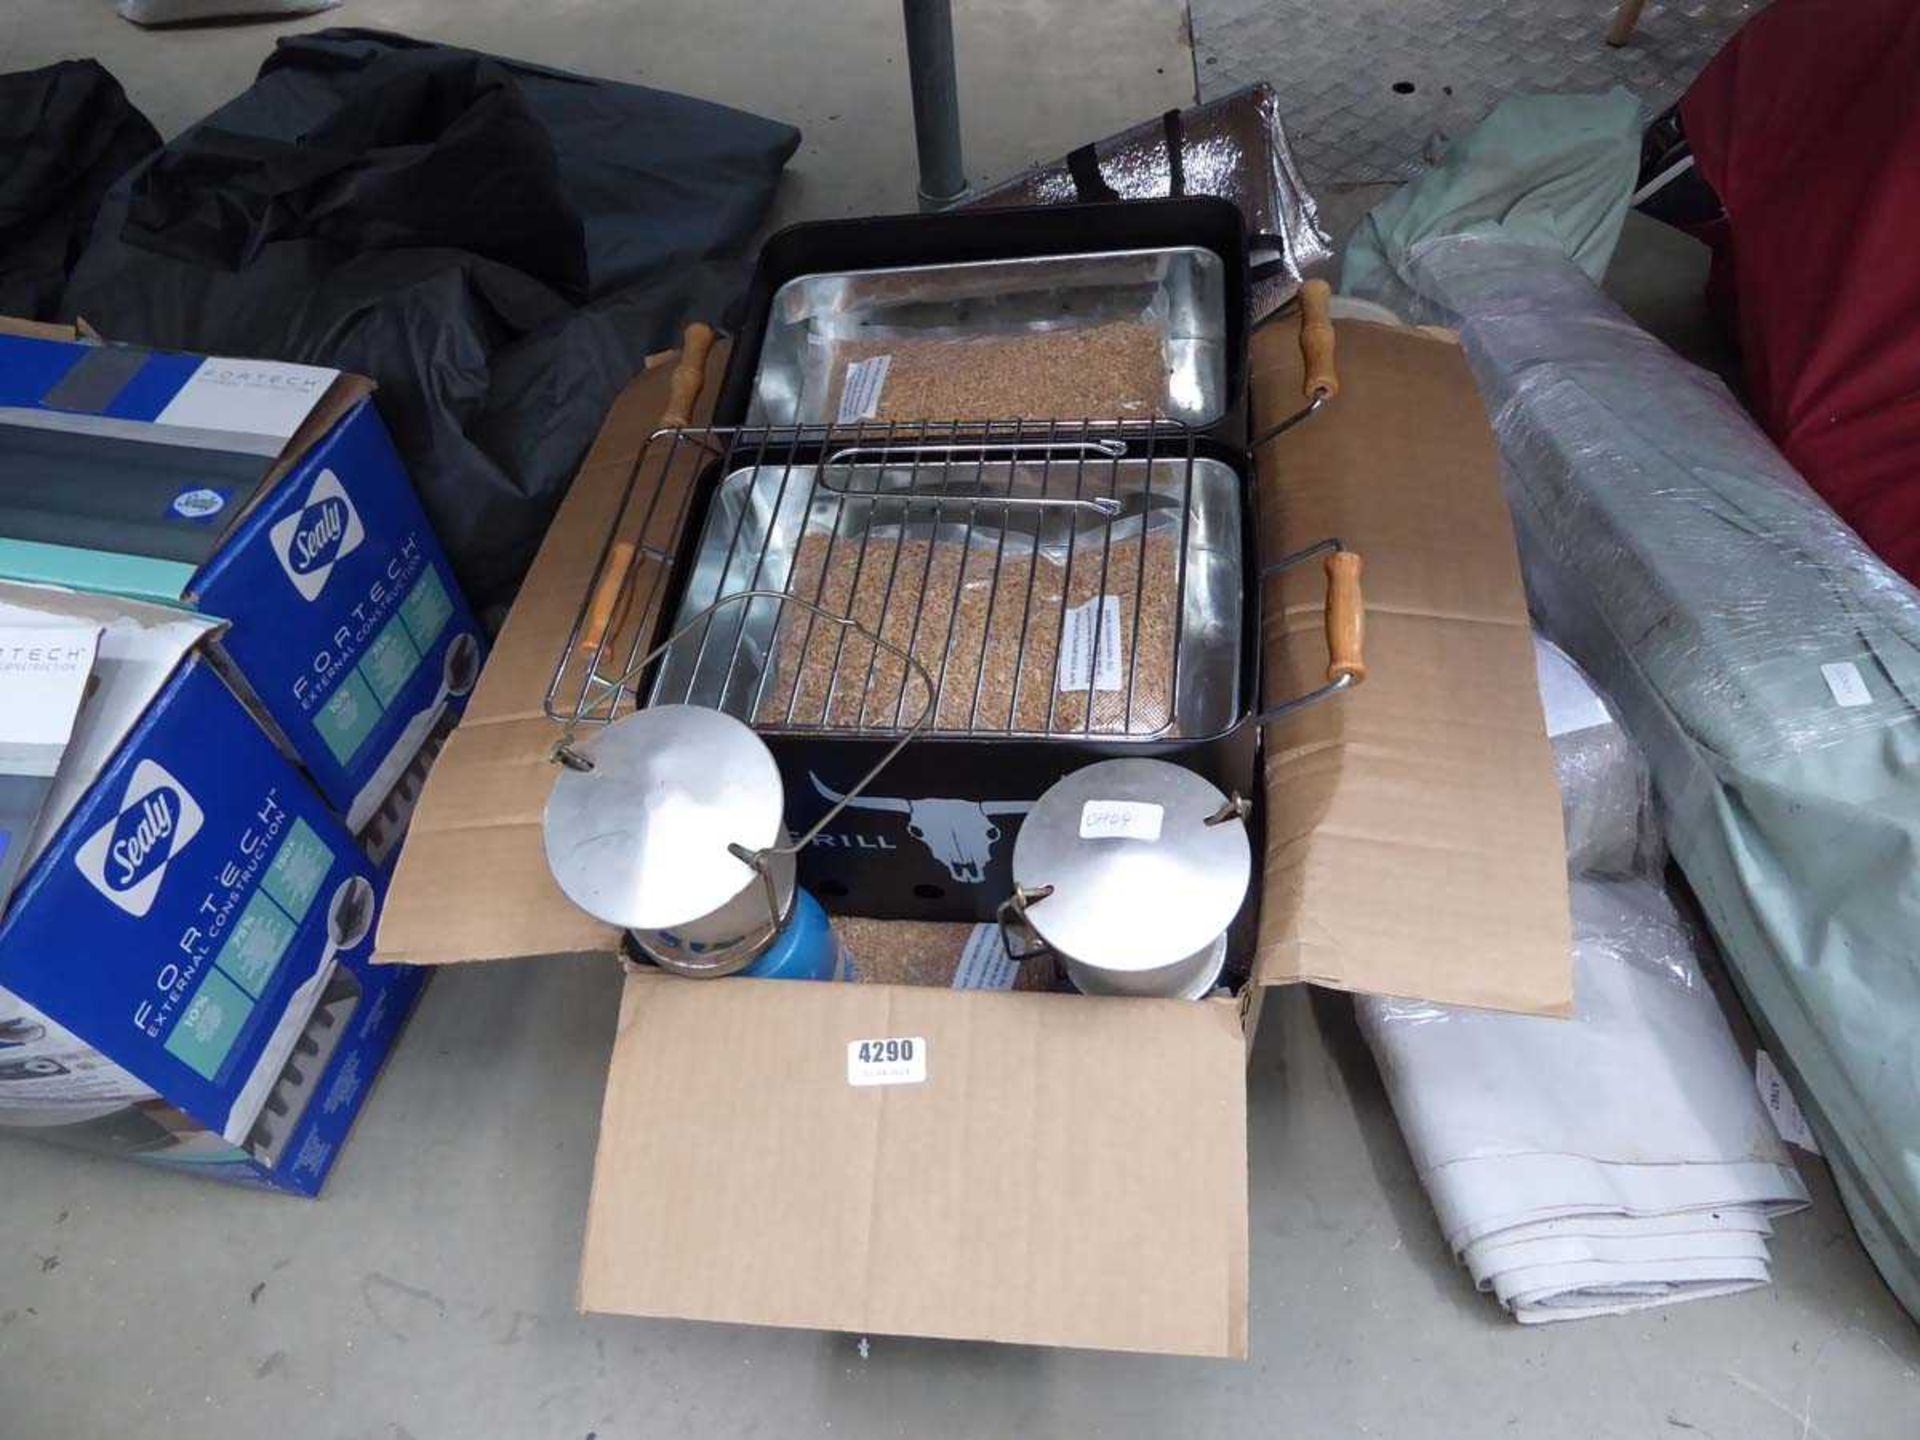 2 smoking grills and oakwood shavings, with 2 lamps